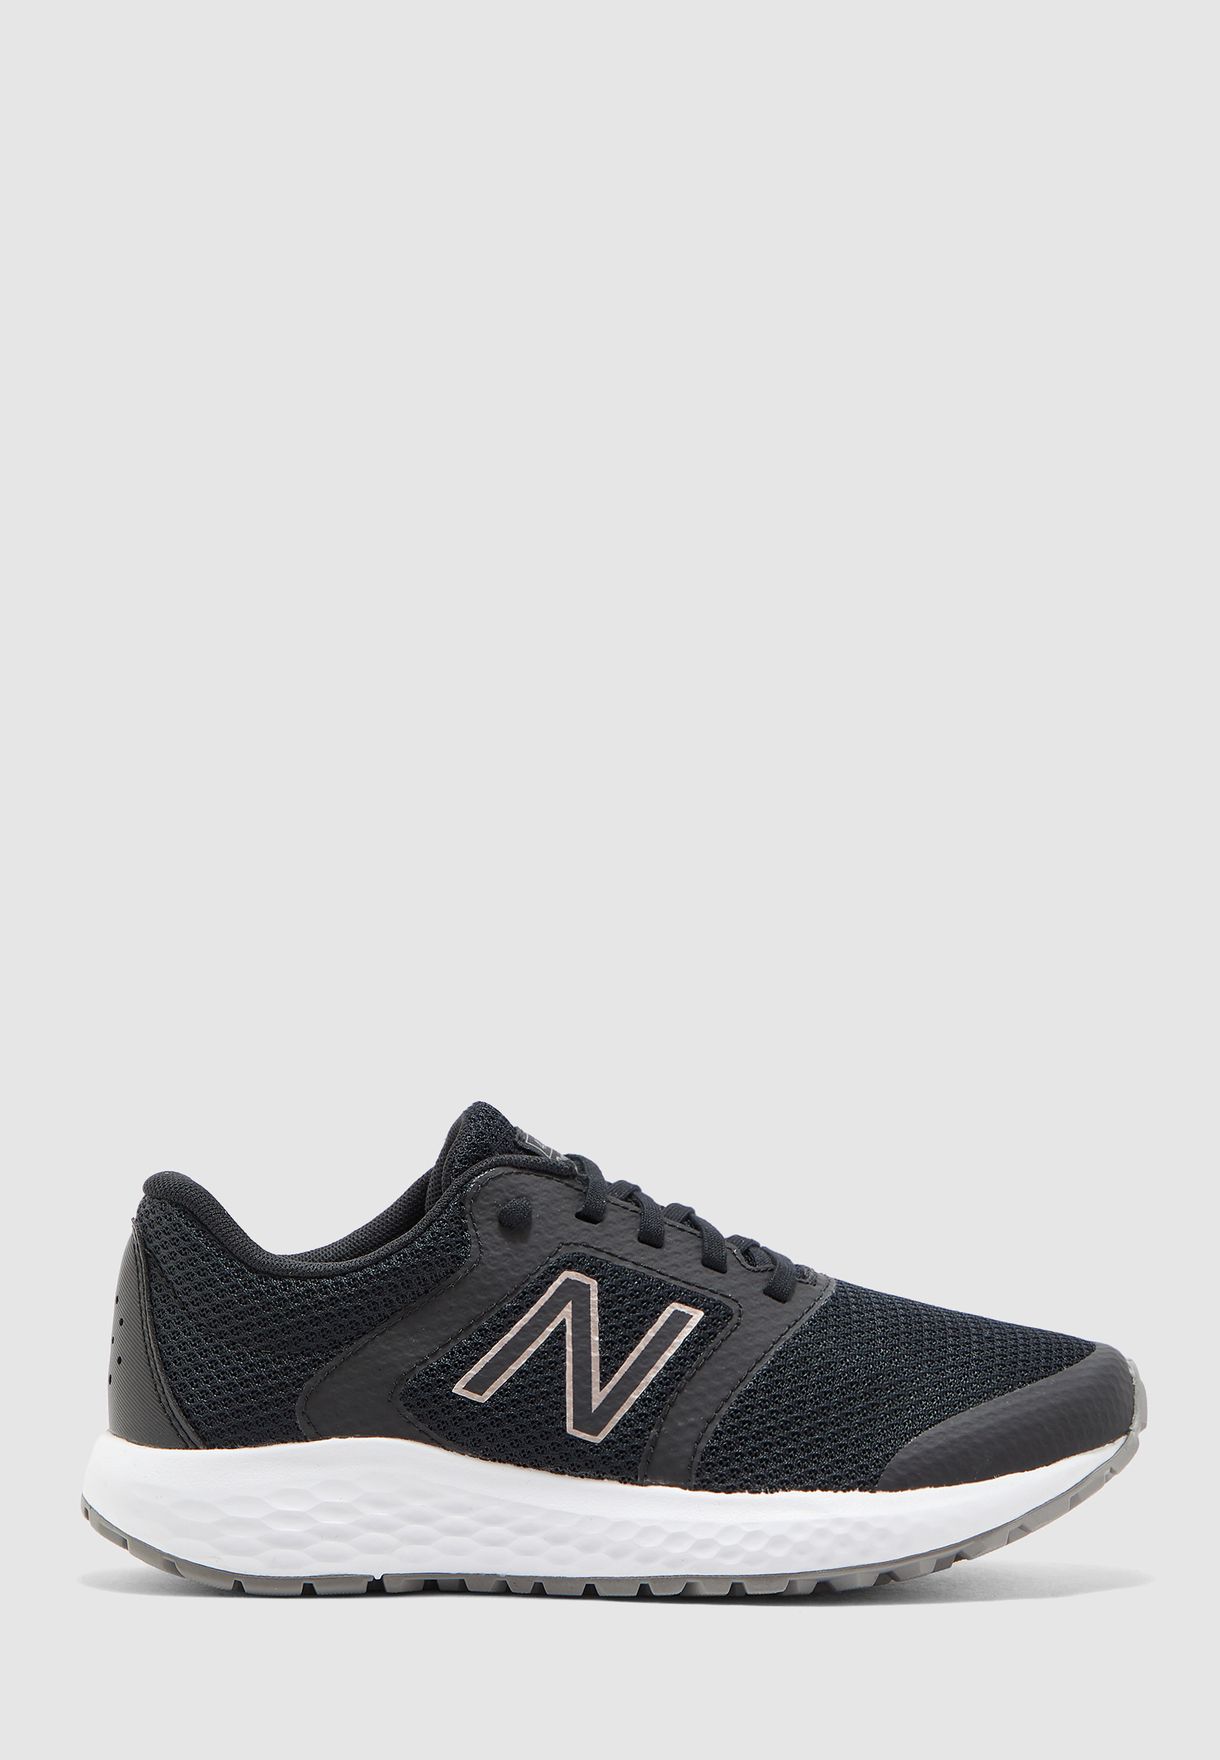 women's new balance 420 running shoes Shop Clothing & Shoes Online